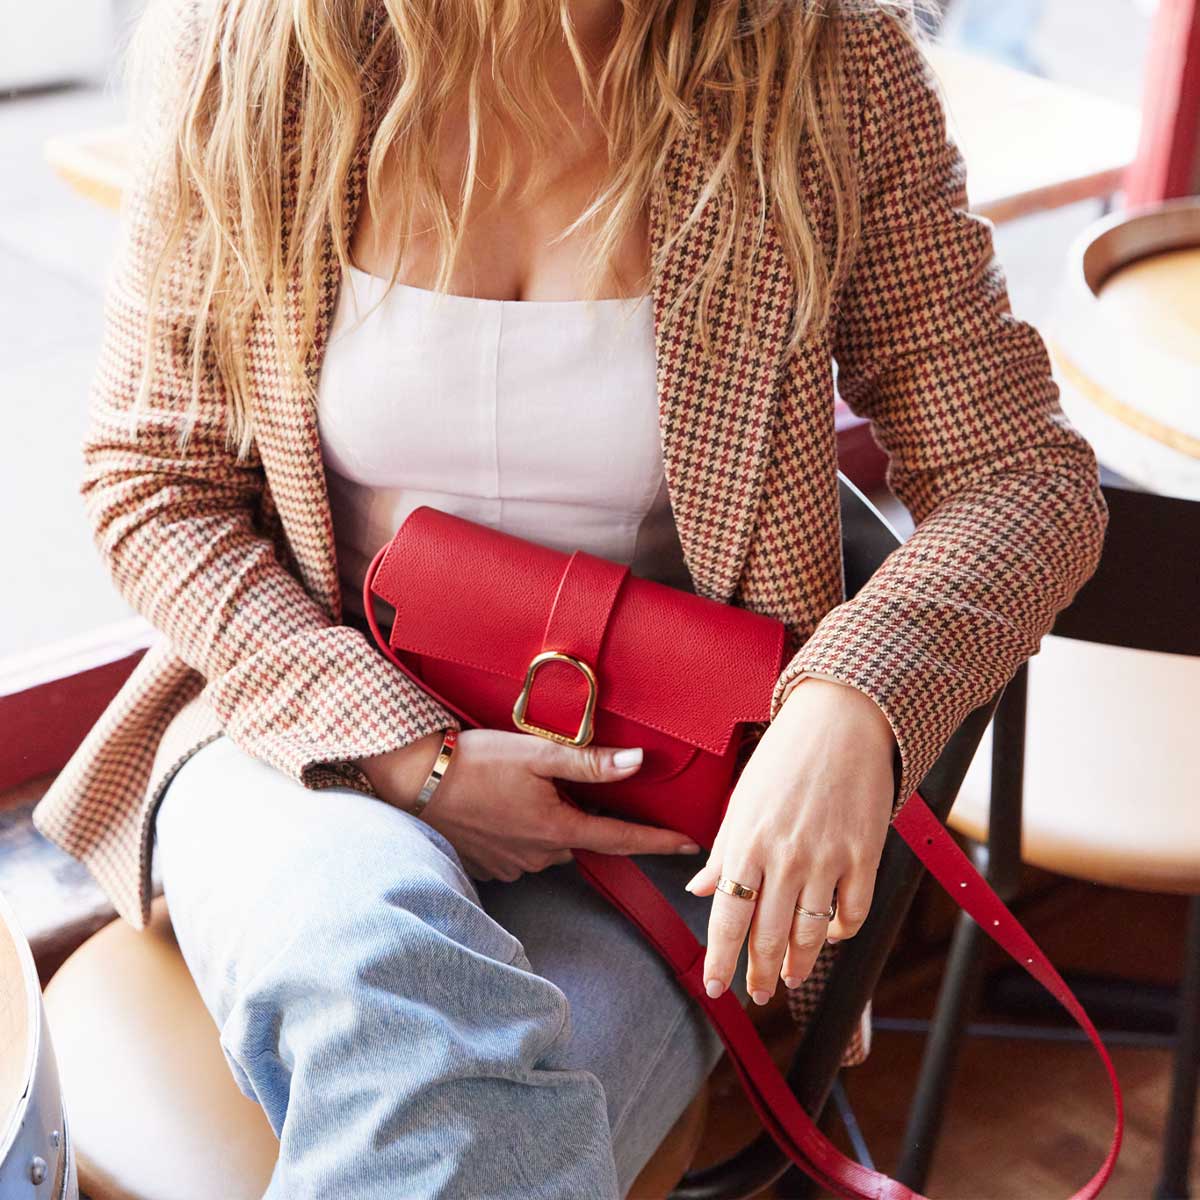 blonde woman wearing a plaid blazer holding a red leather belt bag